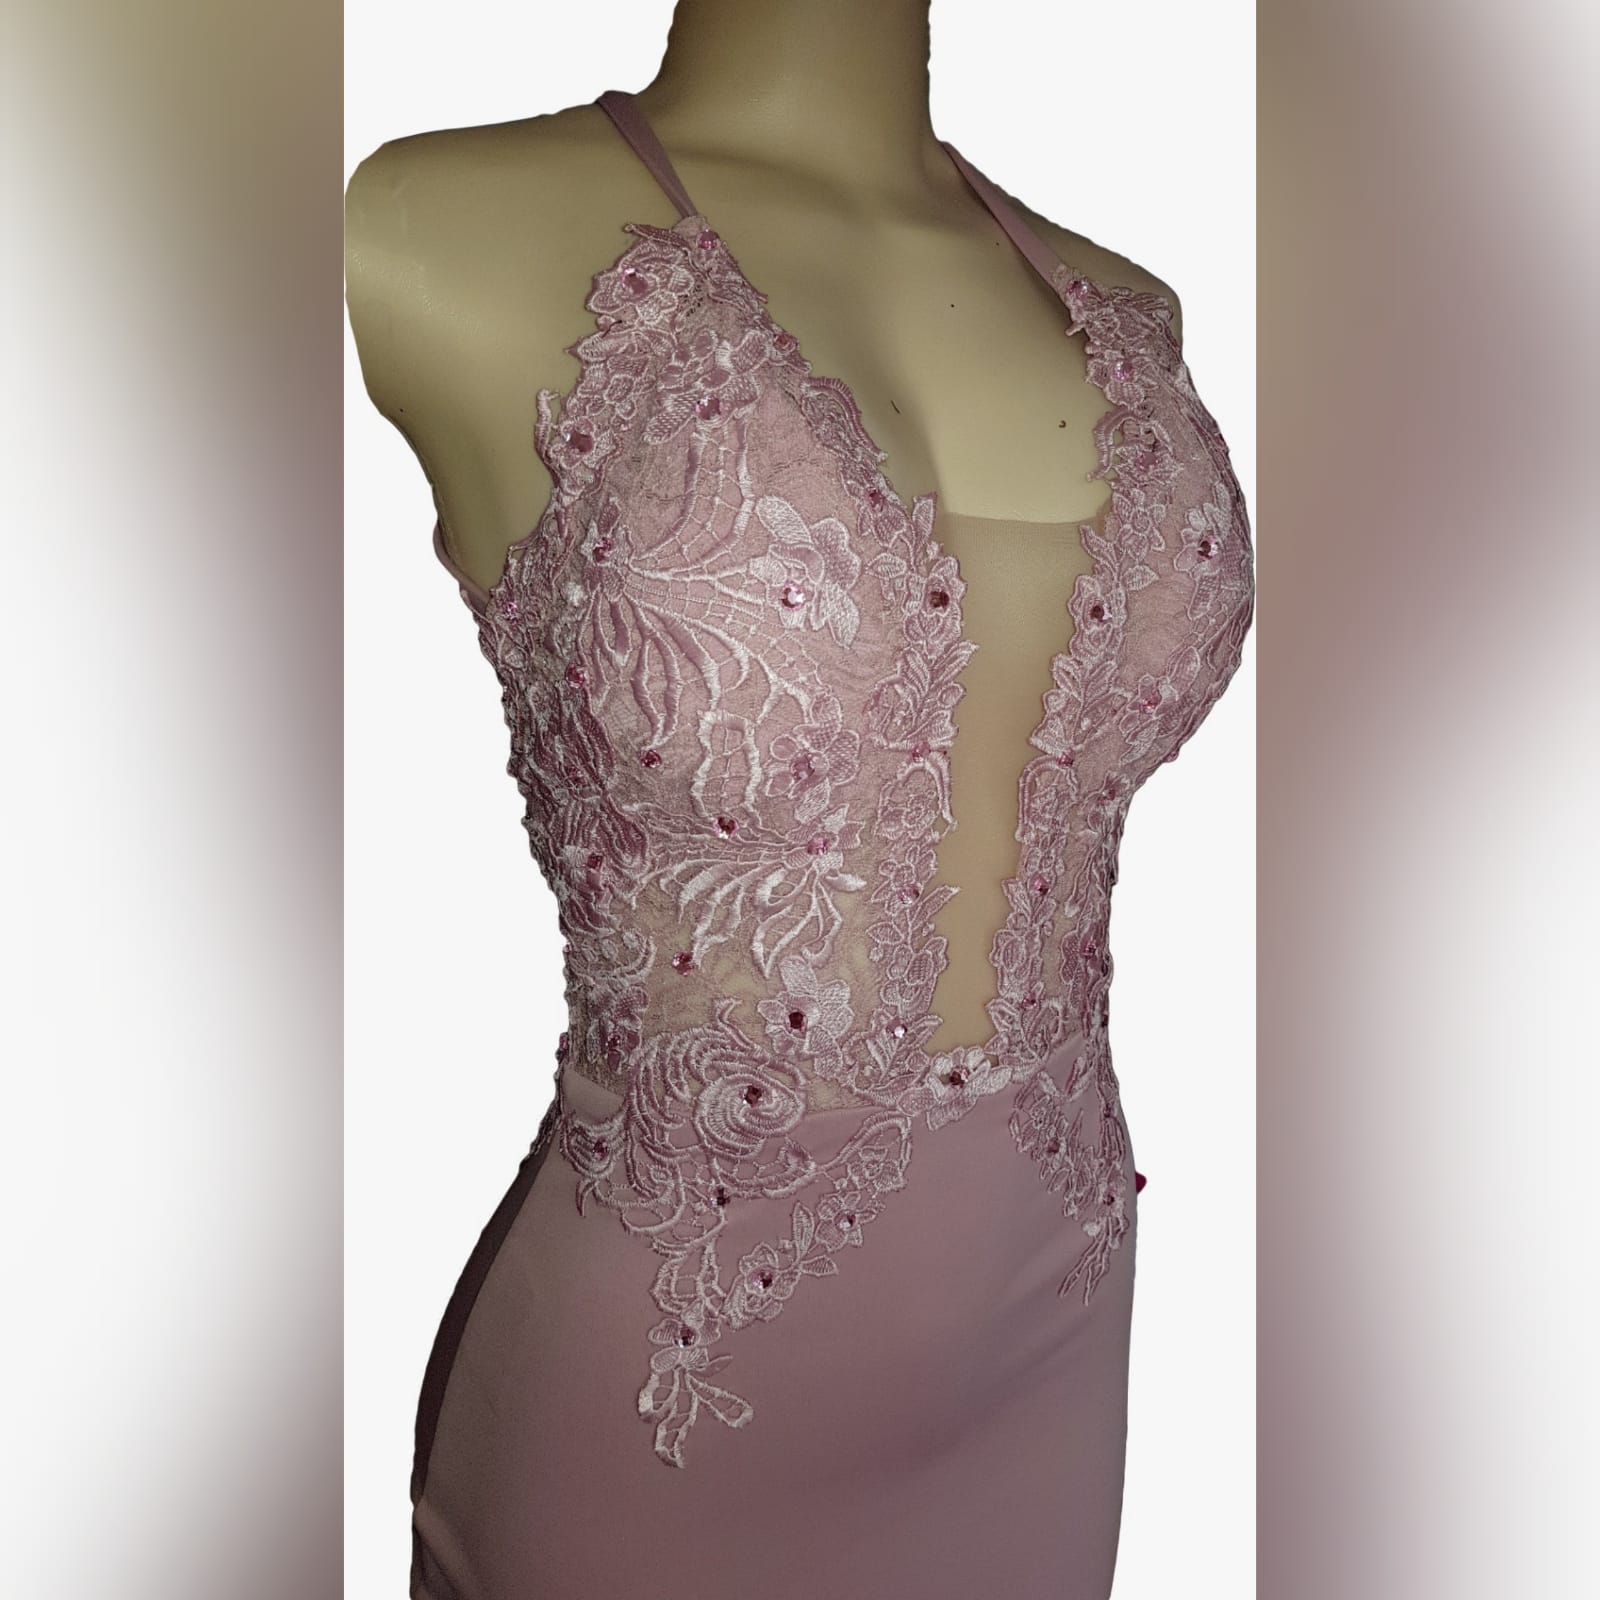 Pink sexy soft mermaid prom dress 2 look ravishing on your prom night with this pink sexy soft mermaid prom dress. A fitted lace bodice with a plunging neckline, low back and a train to add some glamour to your important event.